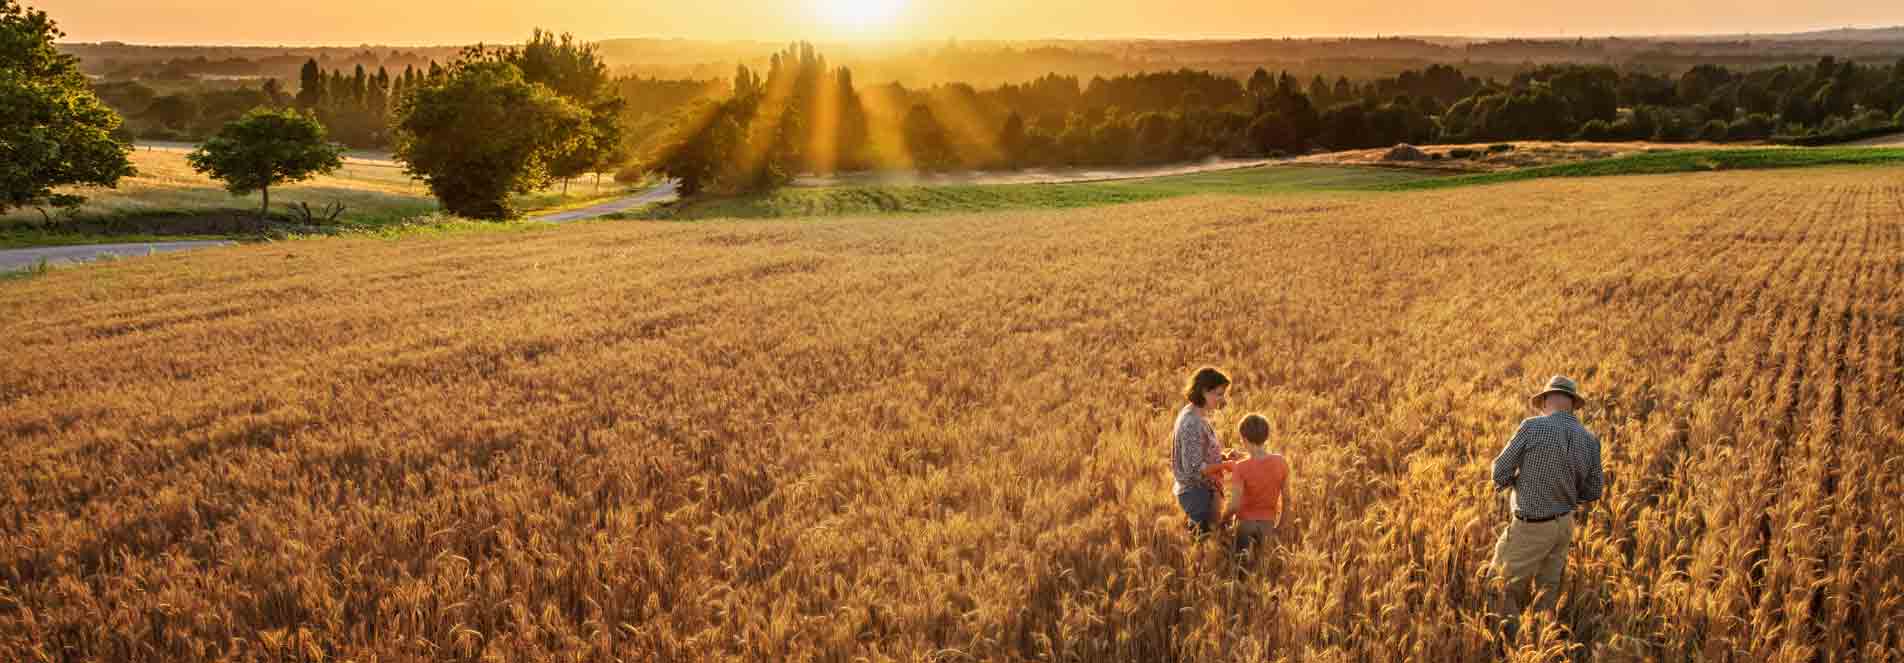 Family in a wheat field during sunset